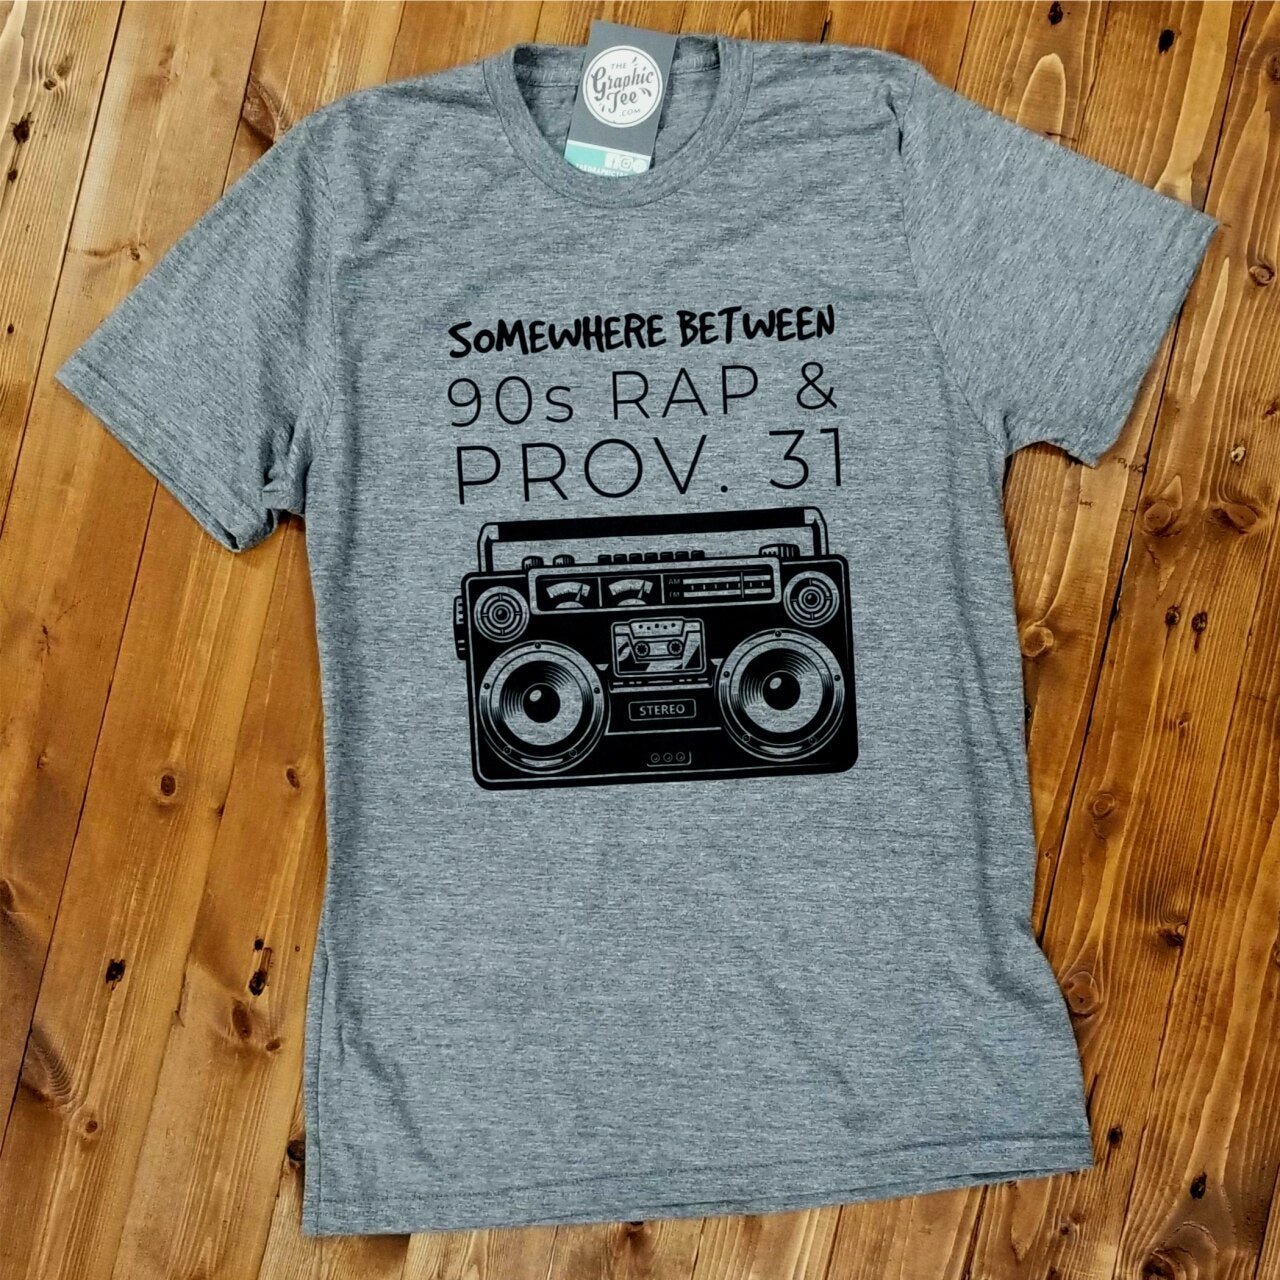 Somewhere Between 90s Rap and Prov. 31 - Aluminum Grey Tee - The Graphic Tee